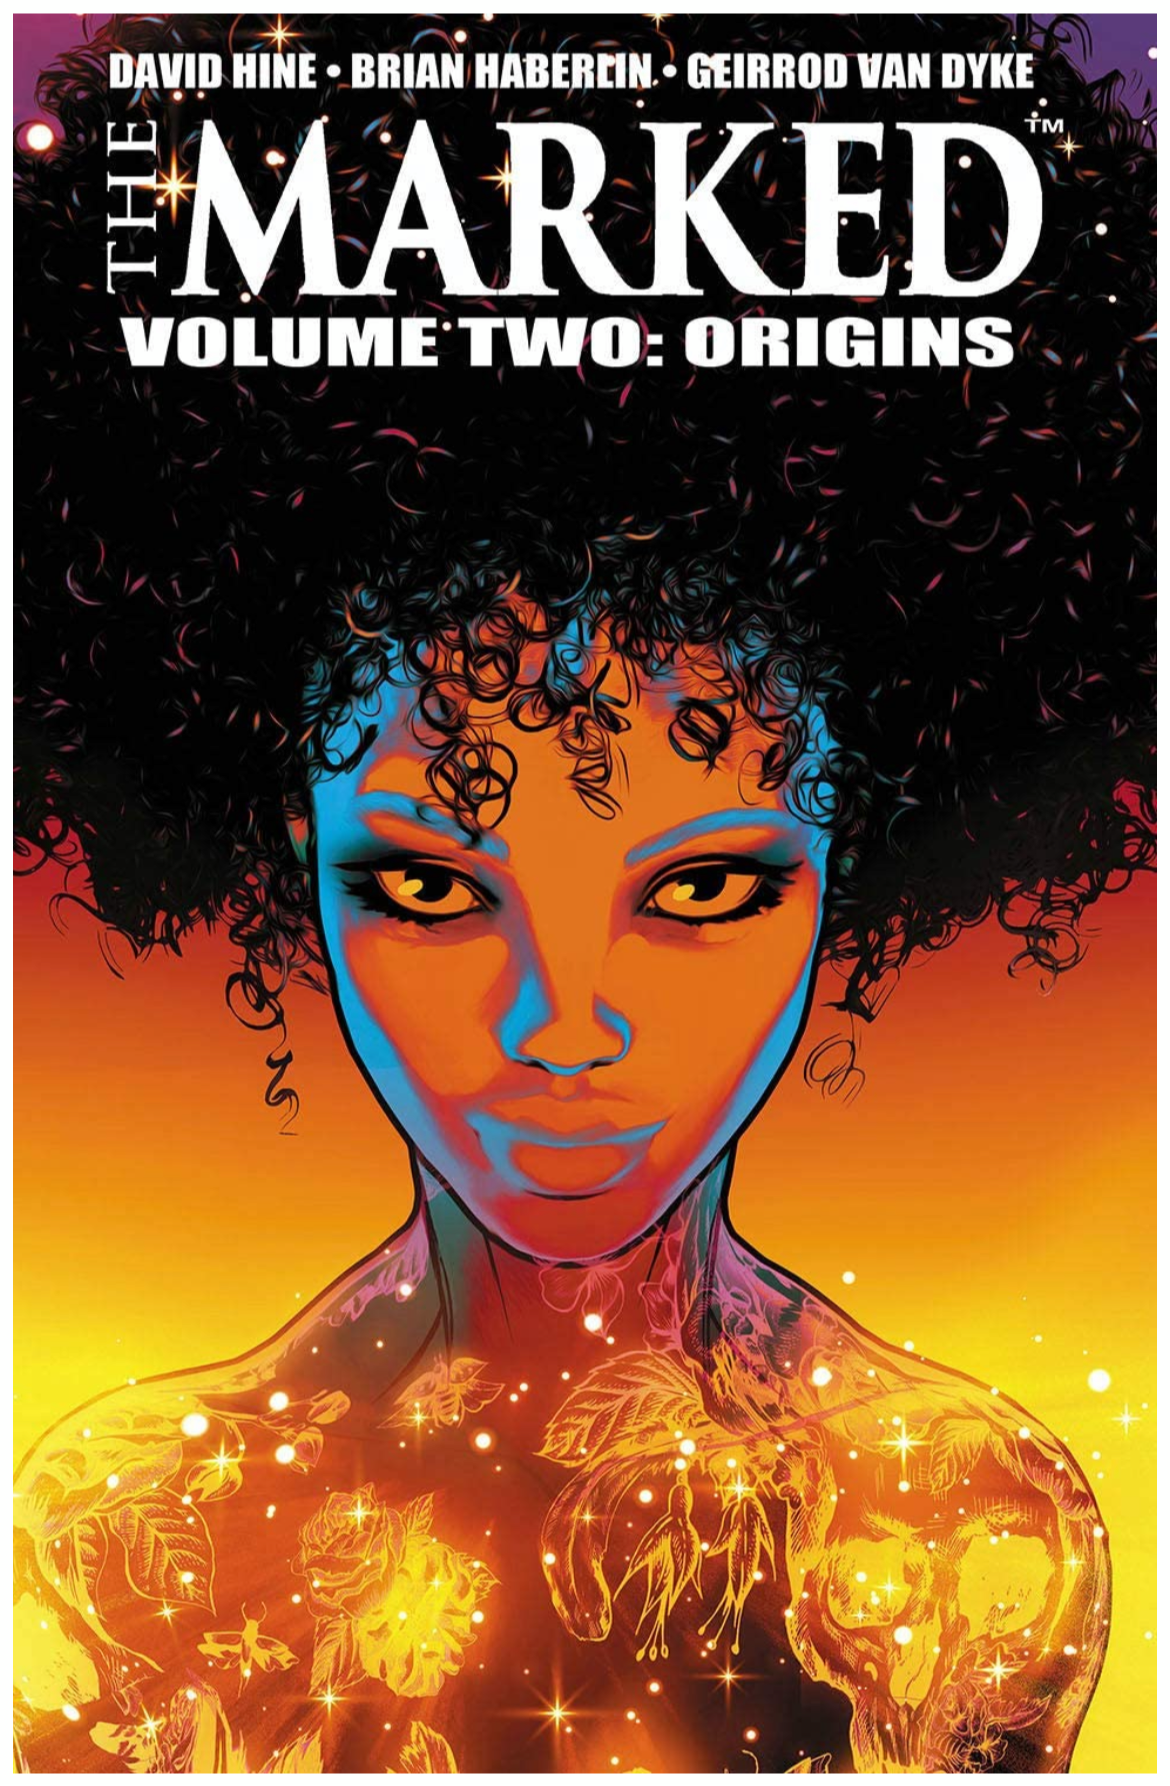 The Marked Vol 2 Origins